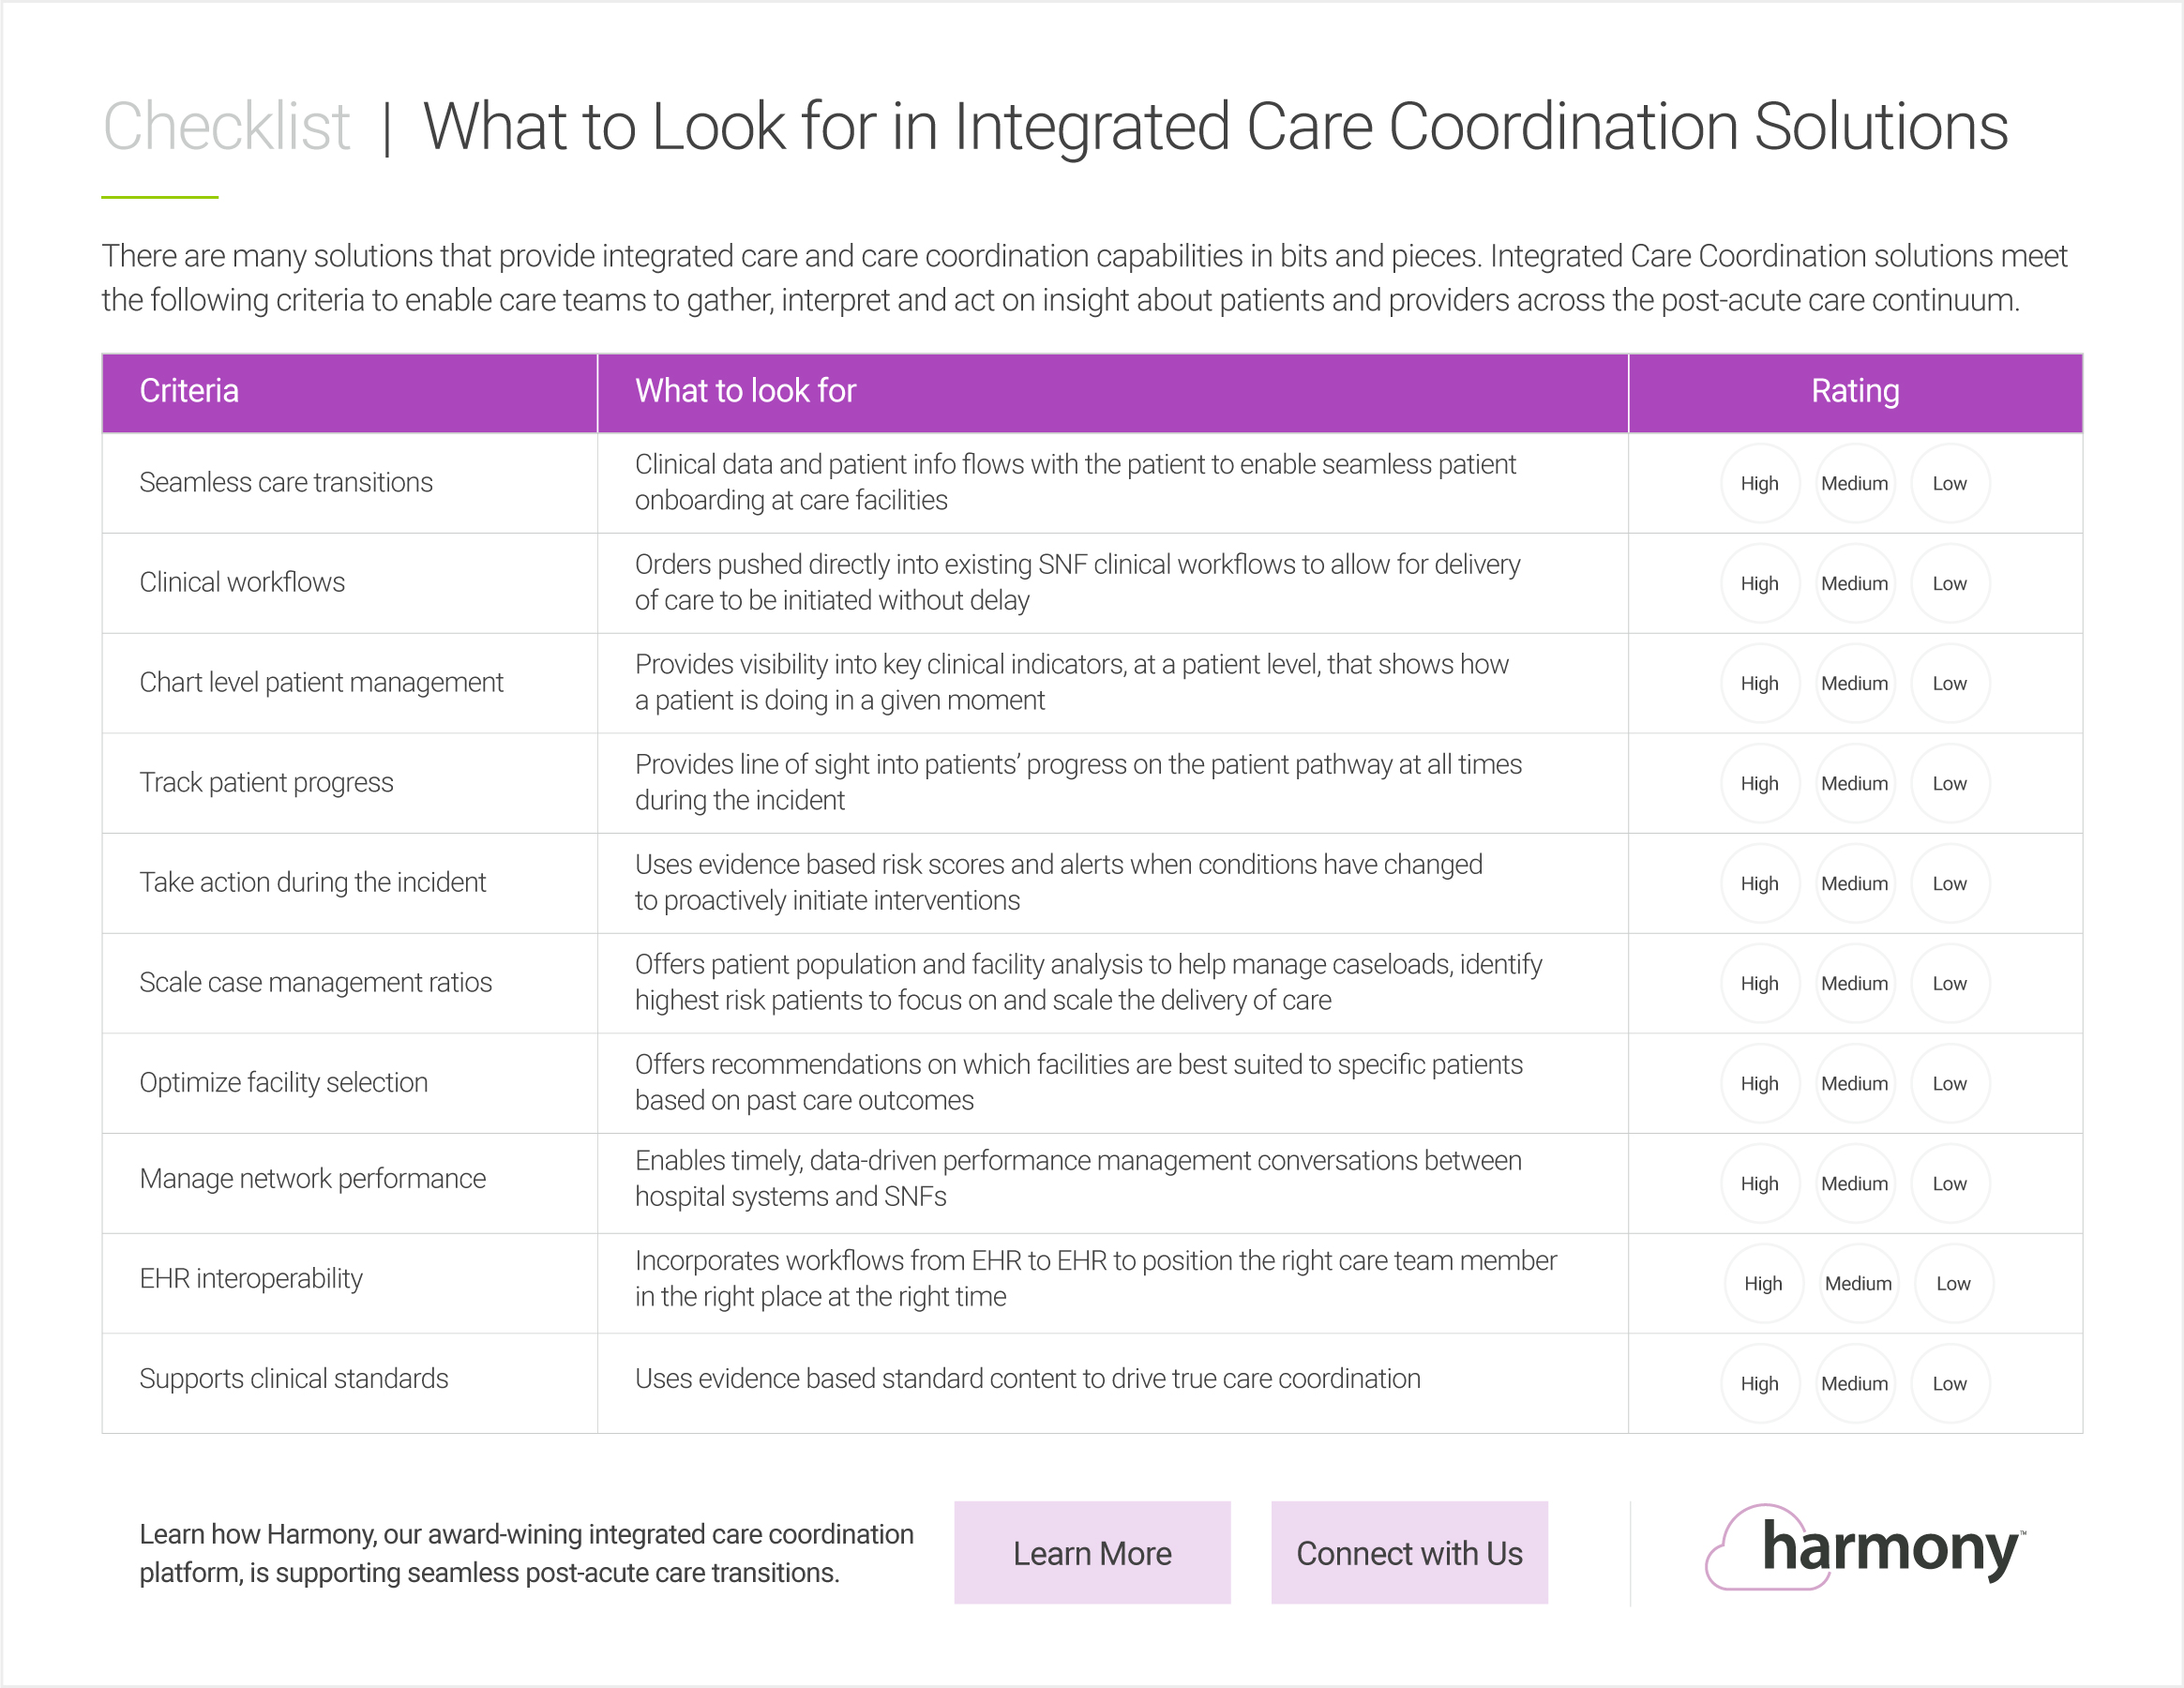 integrated-care-coordination-checklist-cover-pg